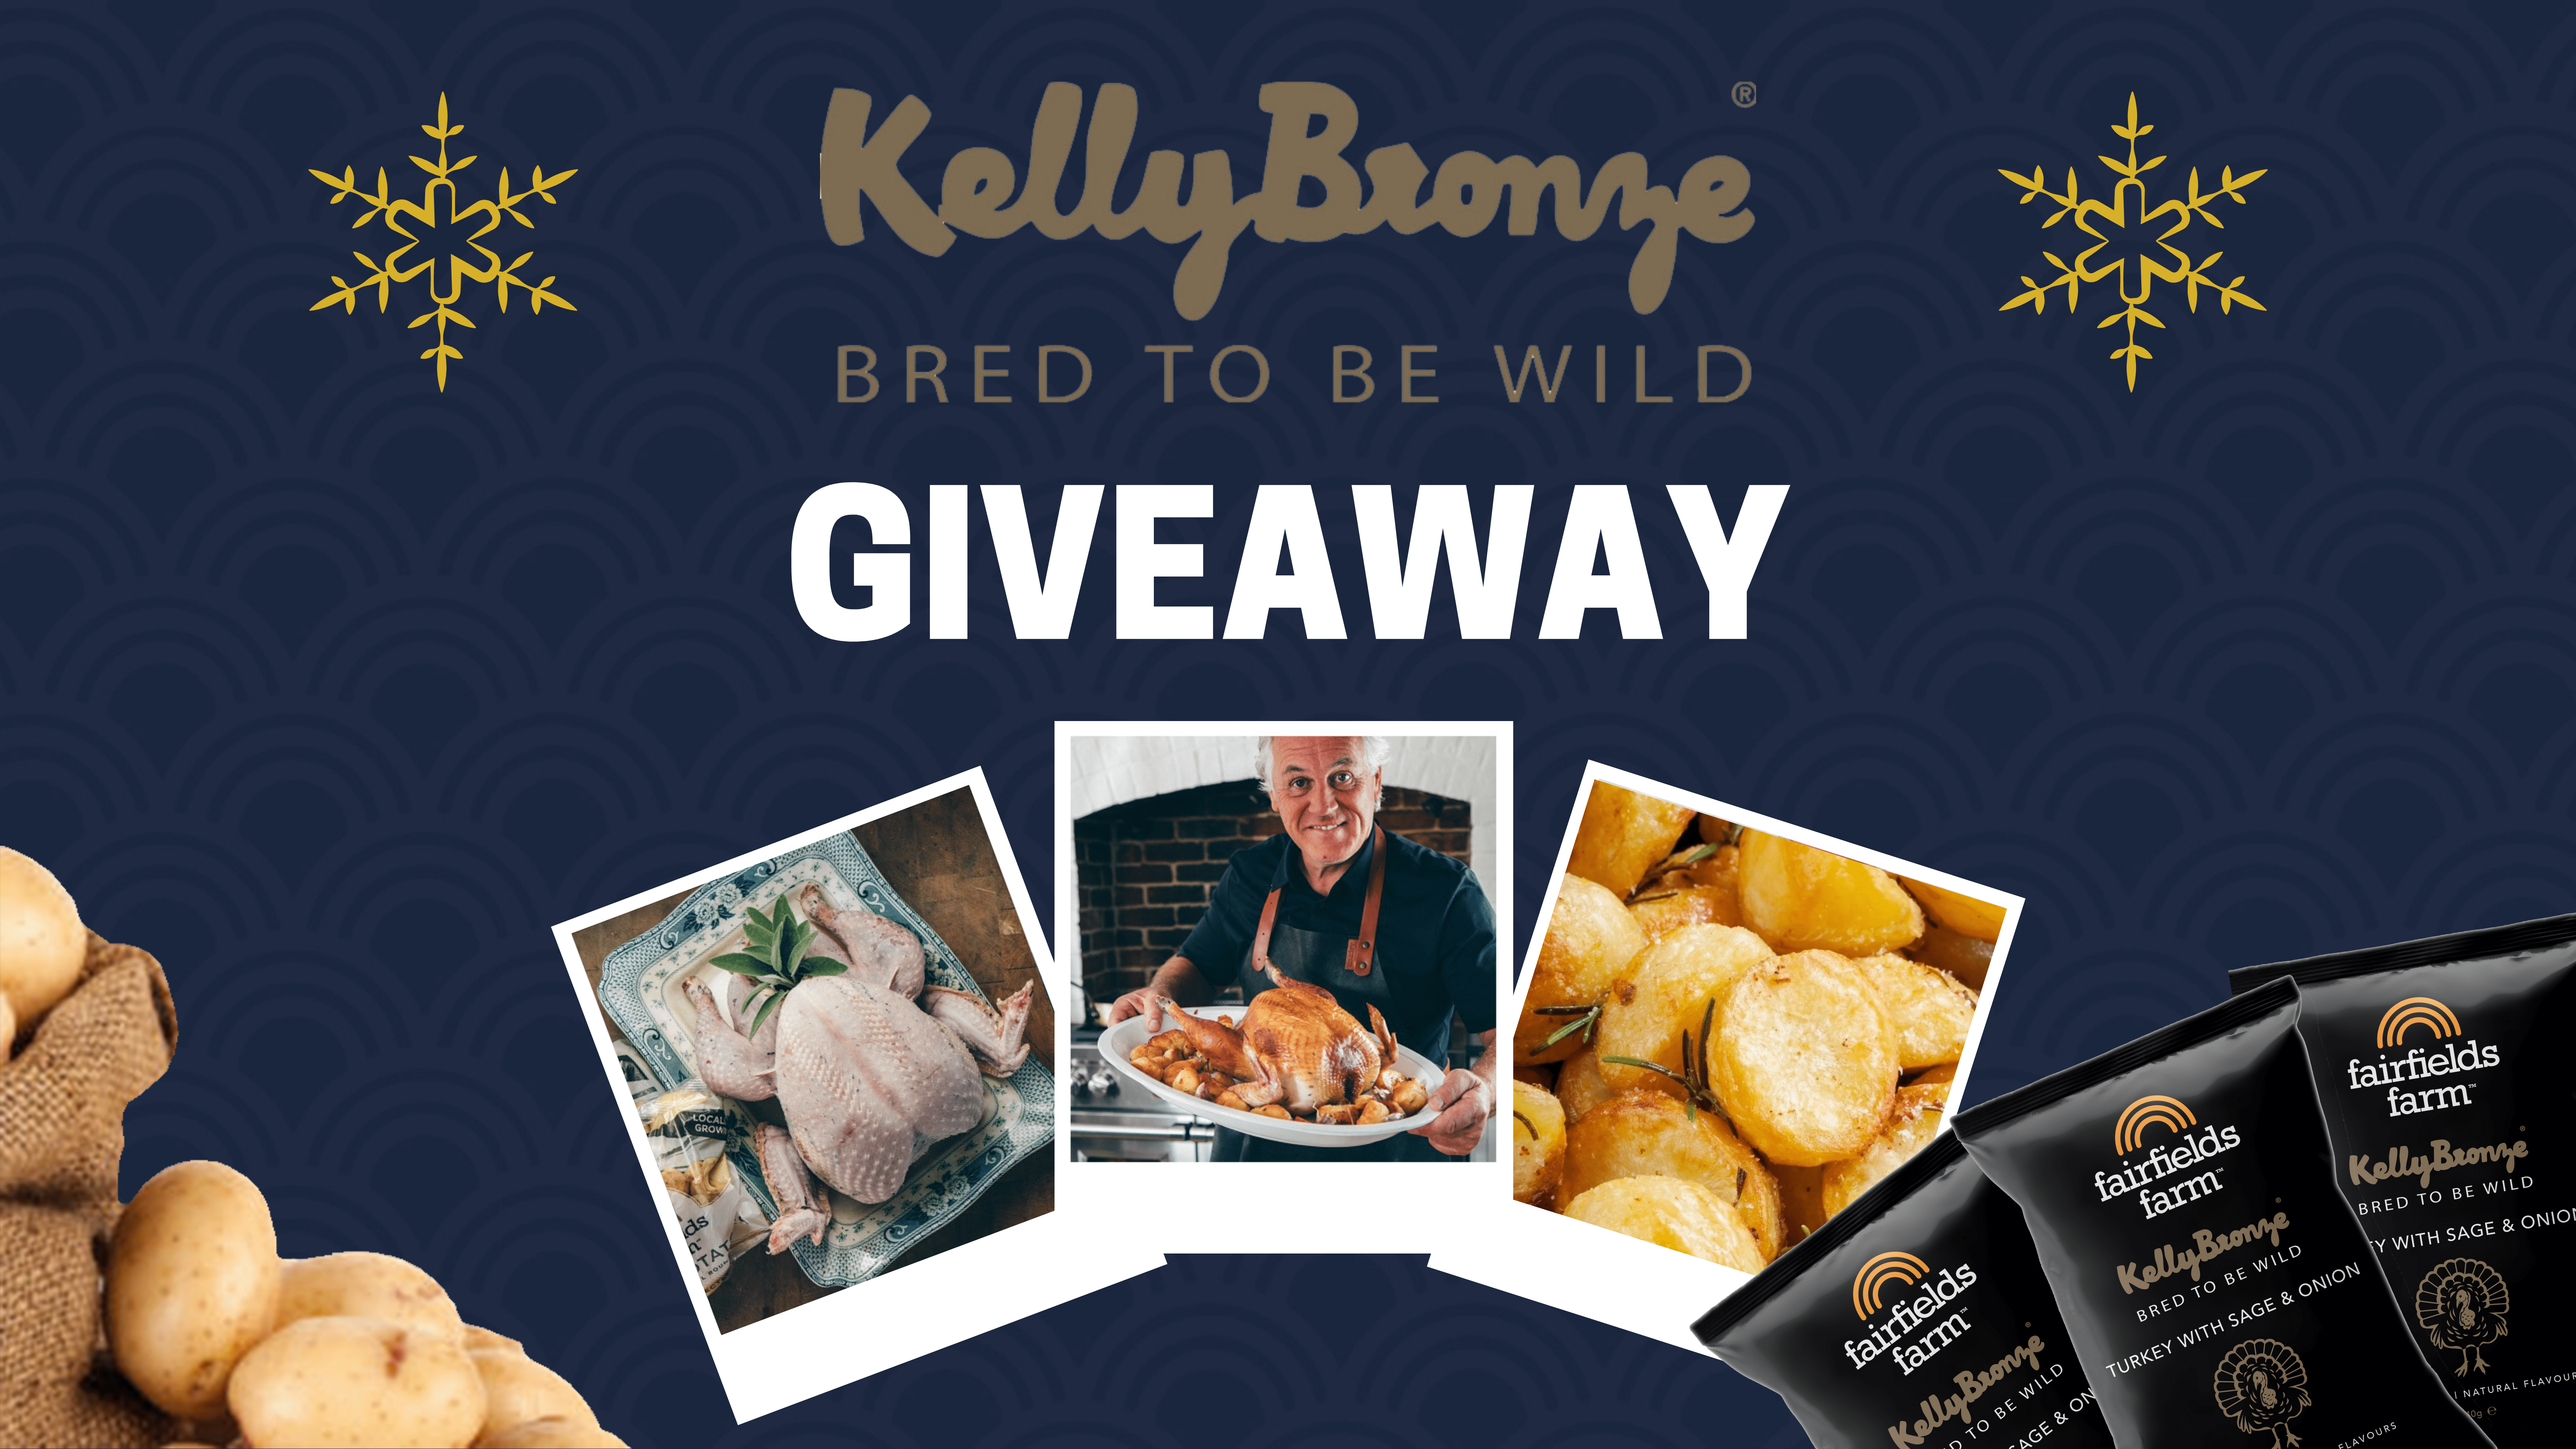 WIN your Christmas Turkey with Kelly Bronze!